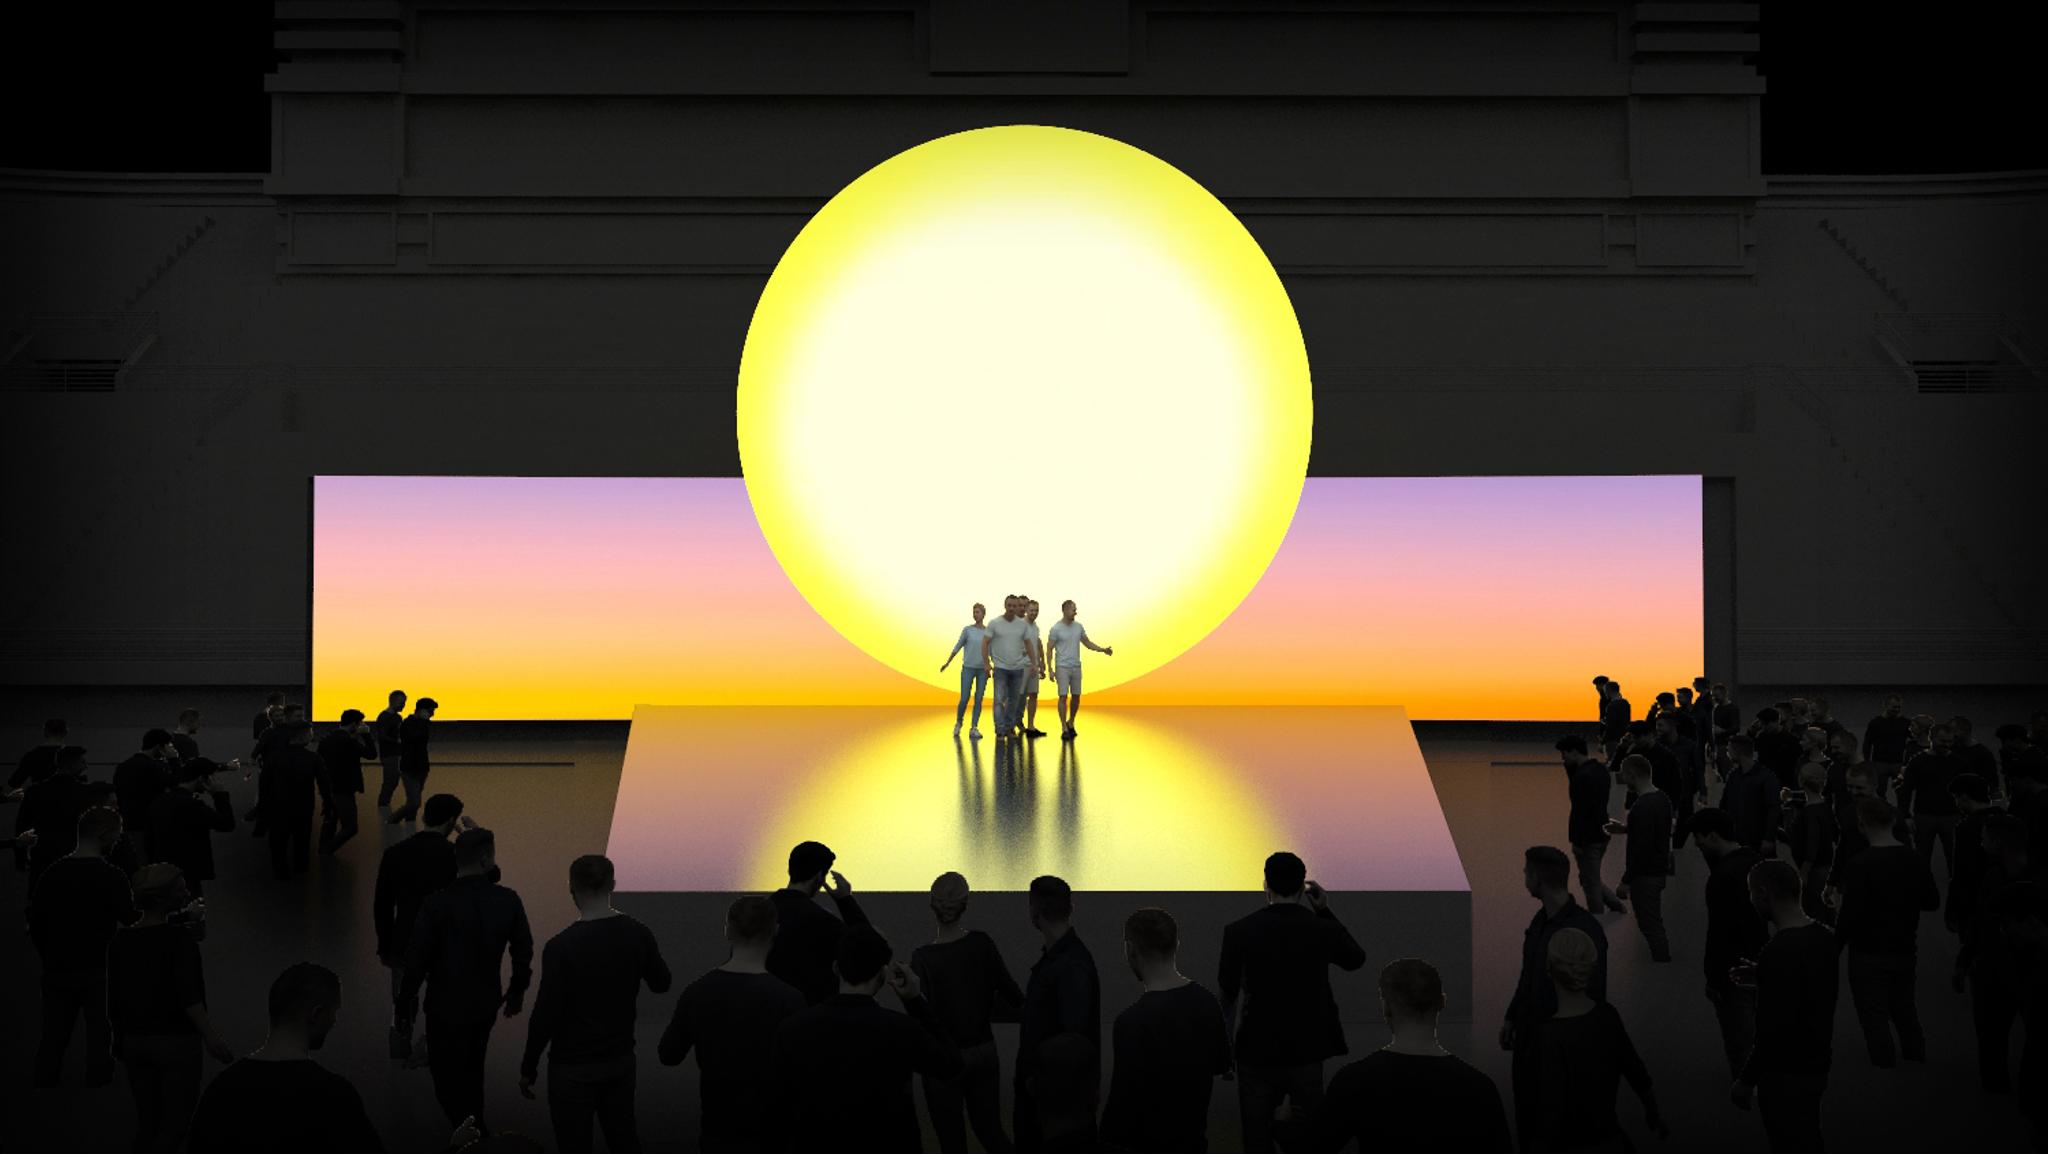 A 3D mockup of the sun in yellow seen more closely.